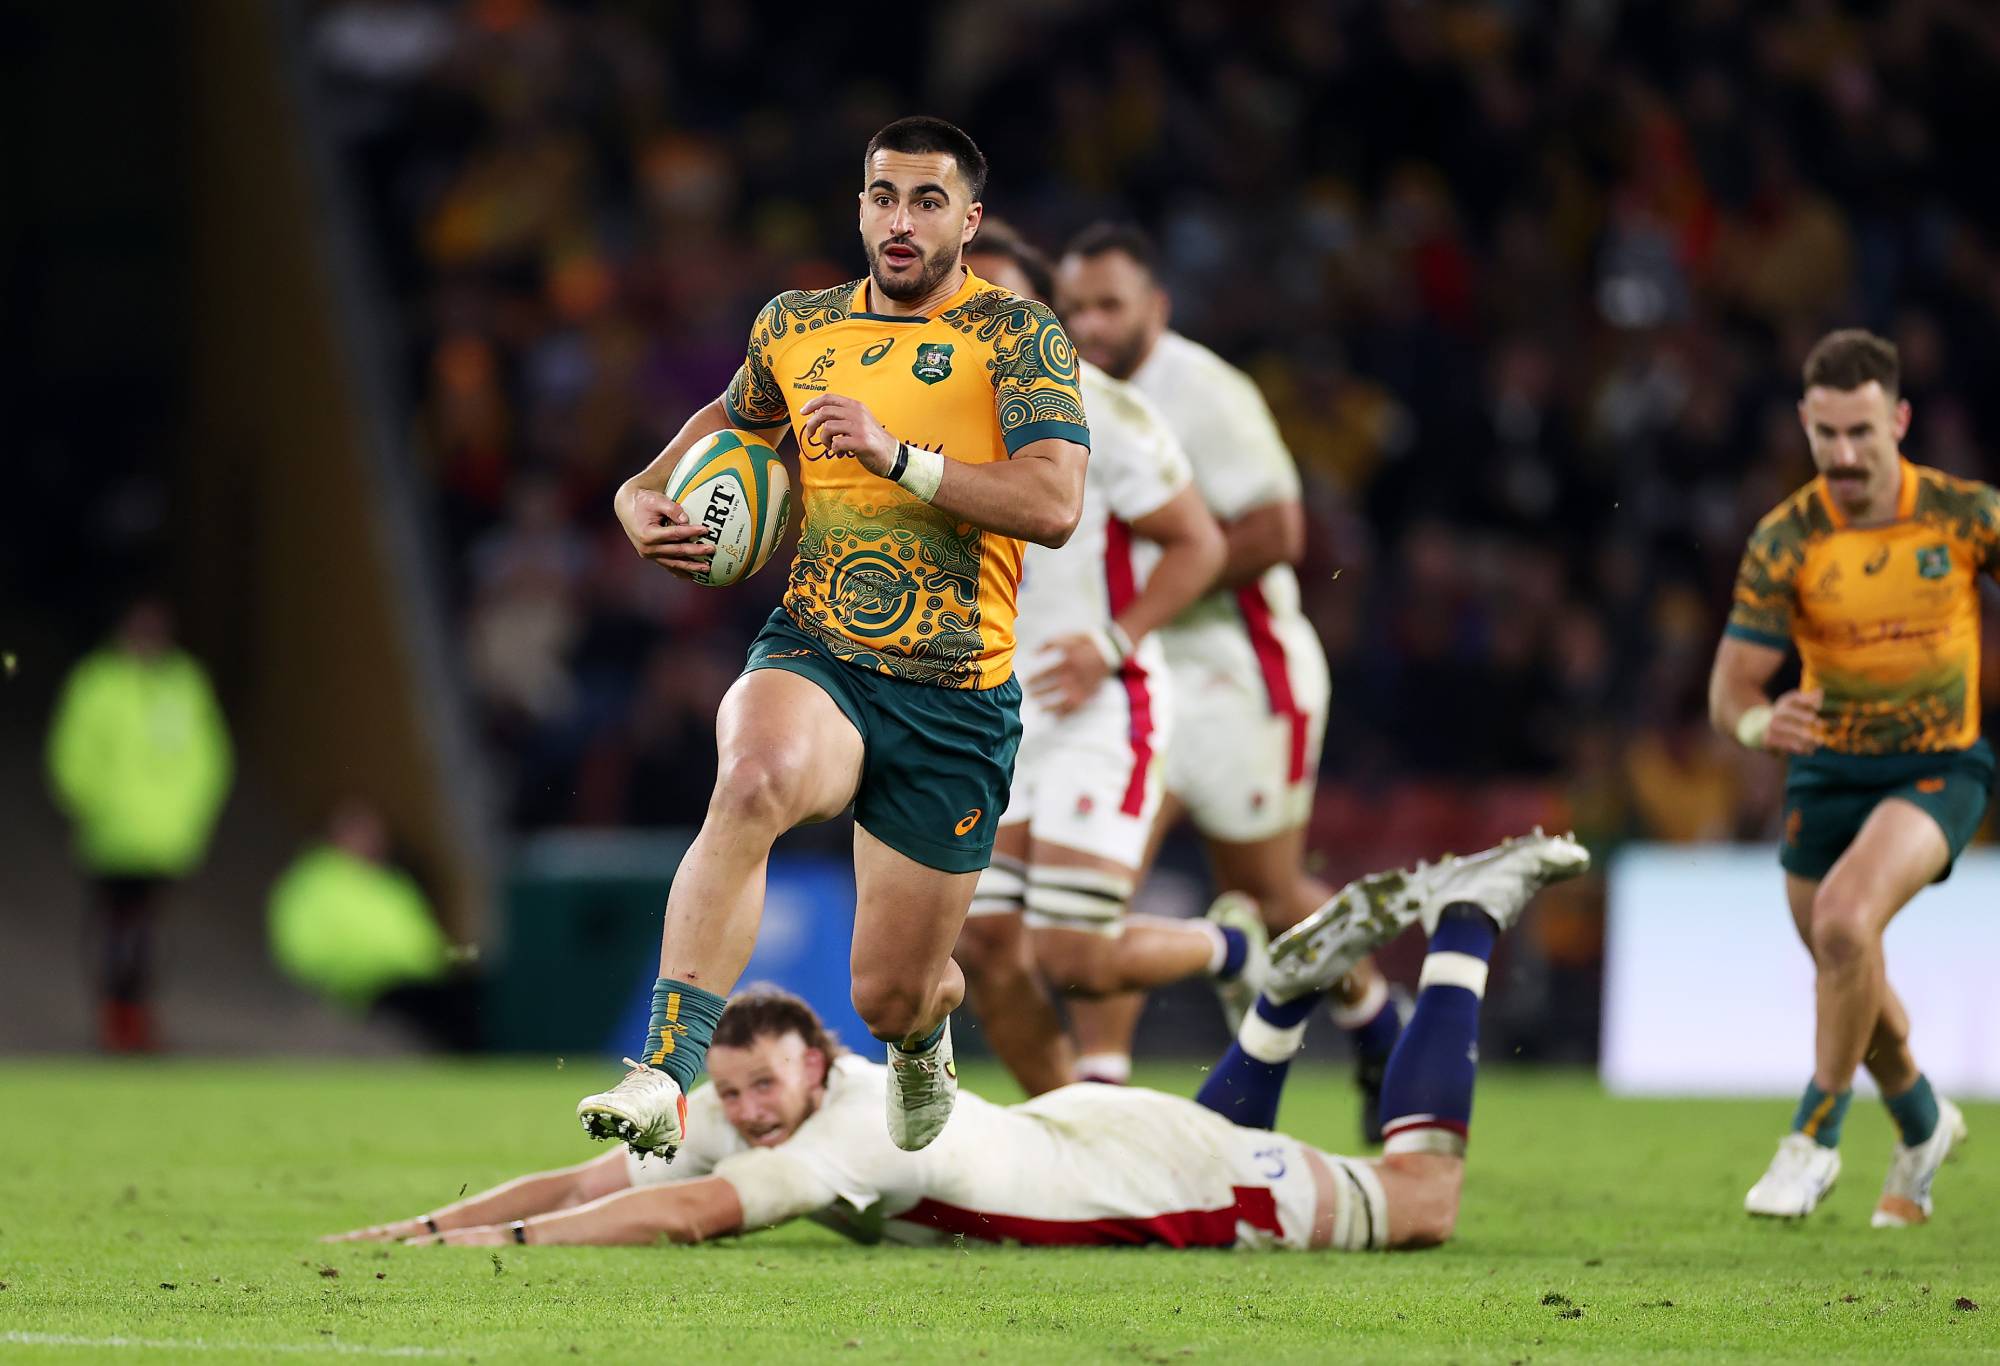 Tom Wright making a run for the Wallabies